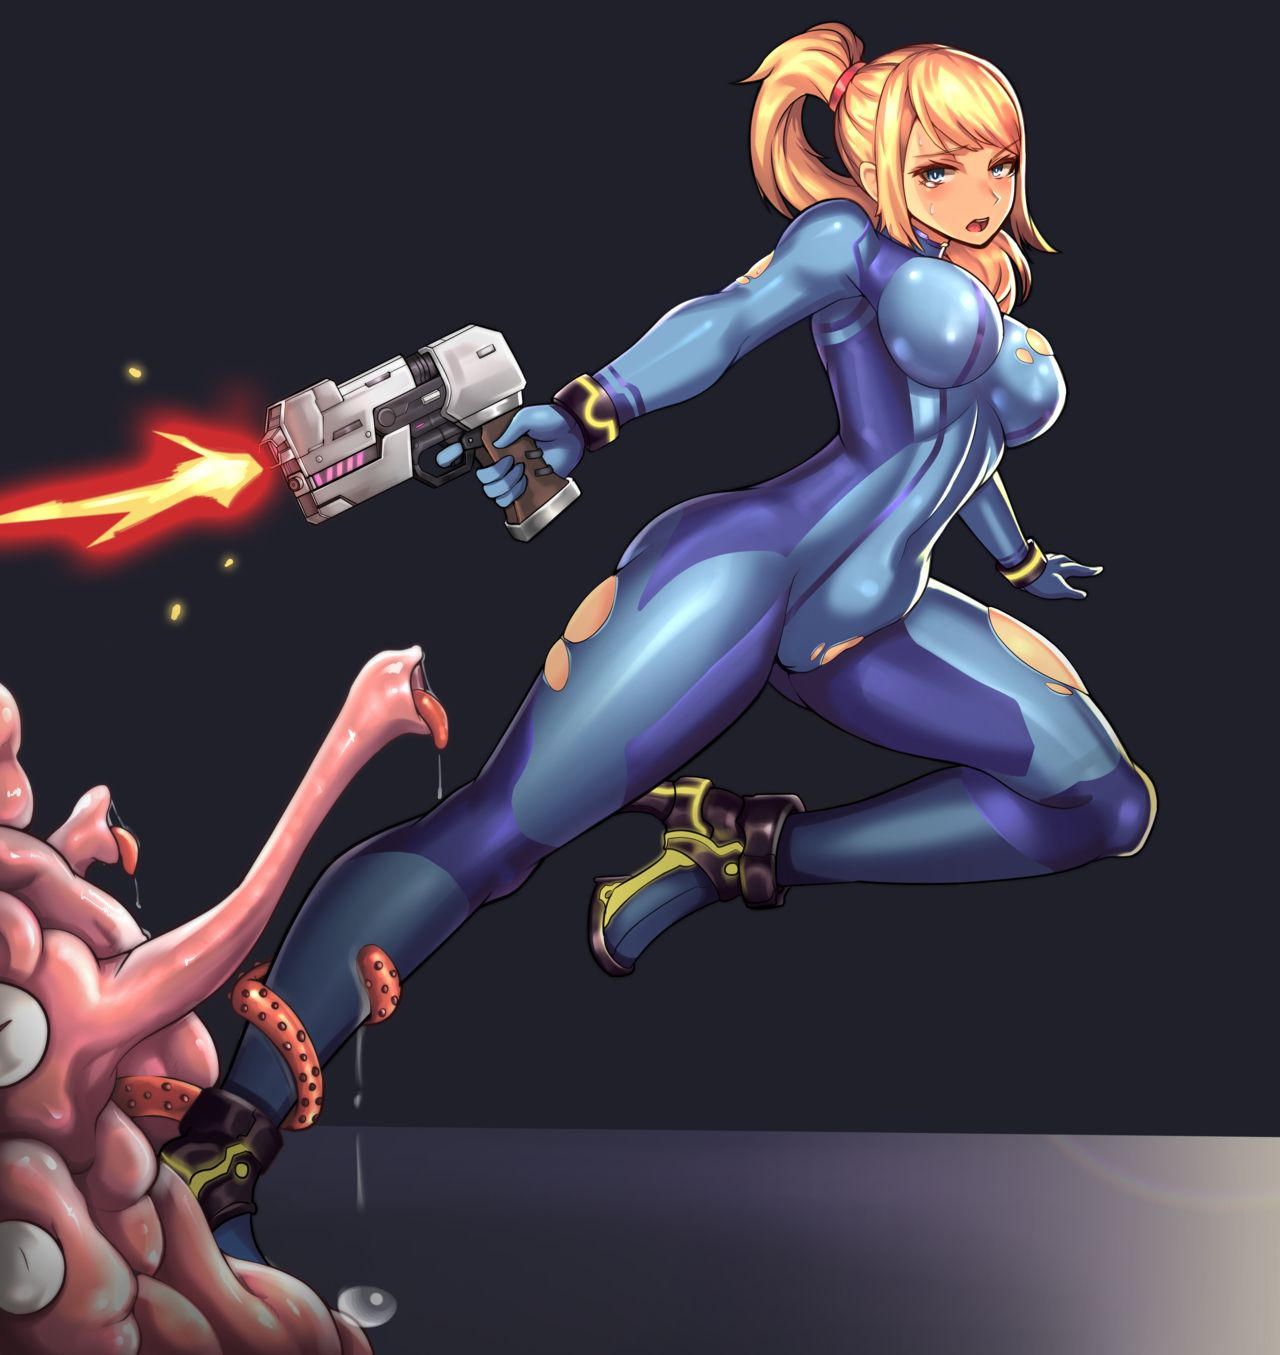 Metroid's secondary erotic imagery. 14